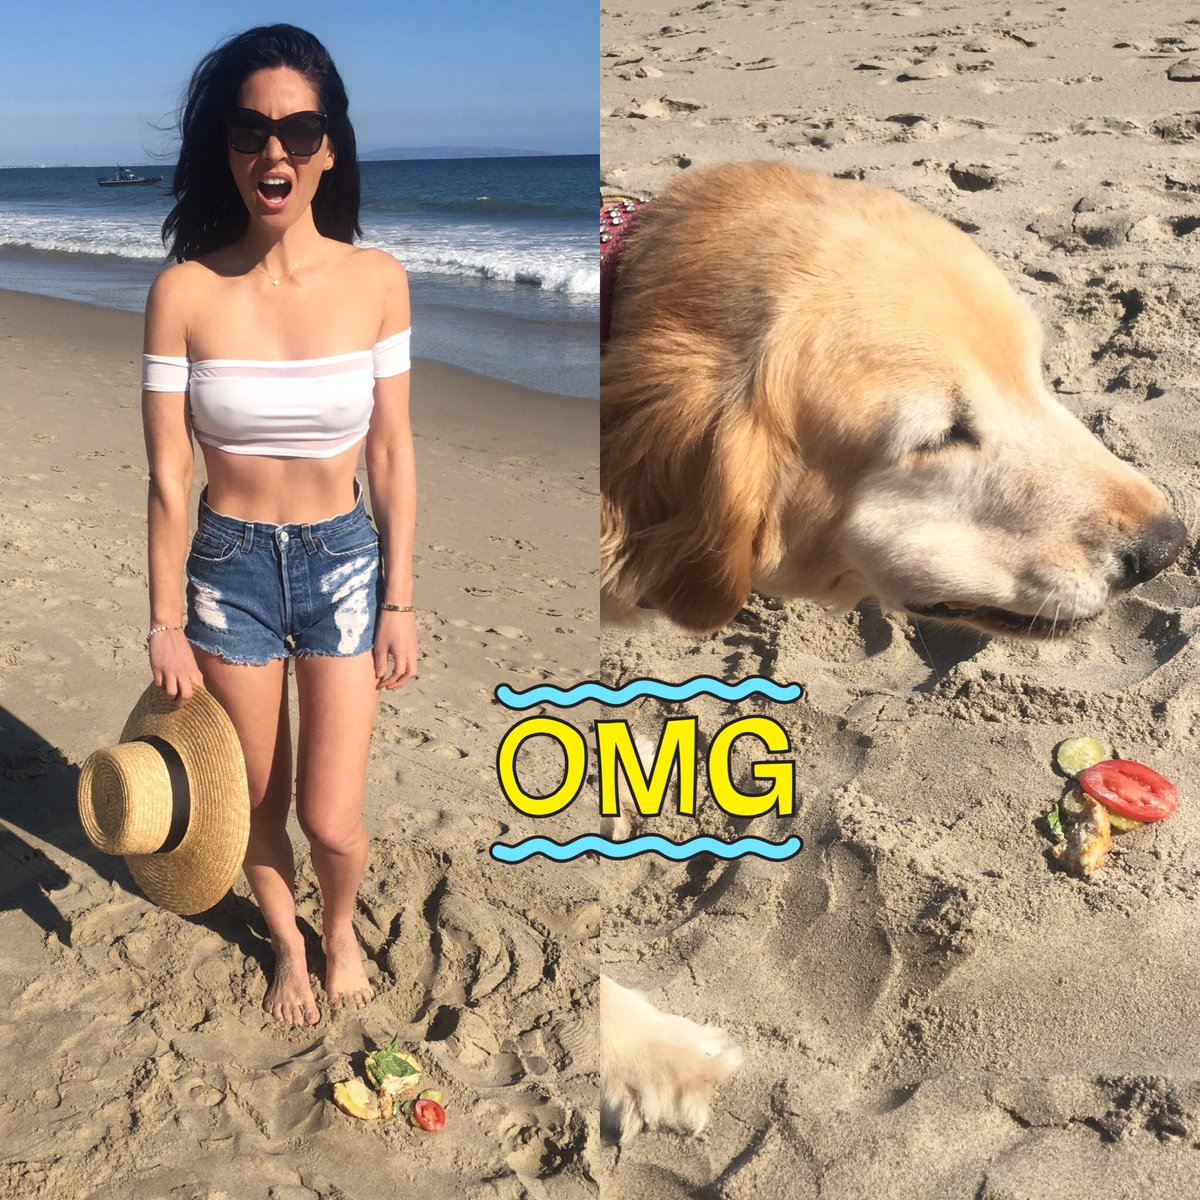 When a bird knocks down your sandwich and then a dog runs up and eats it. #lifesabeach https://t.co/zdRfh7xk9Z